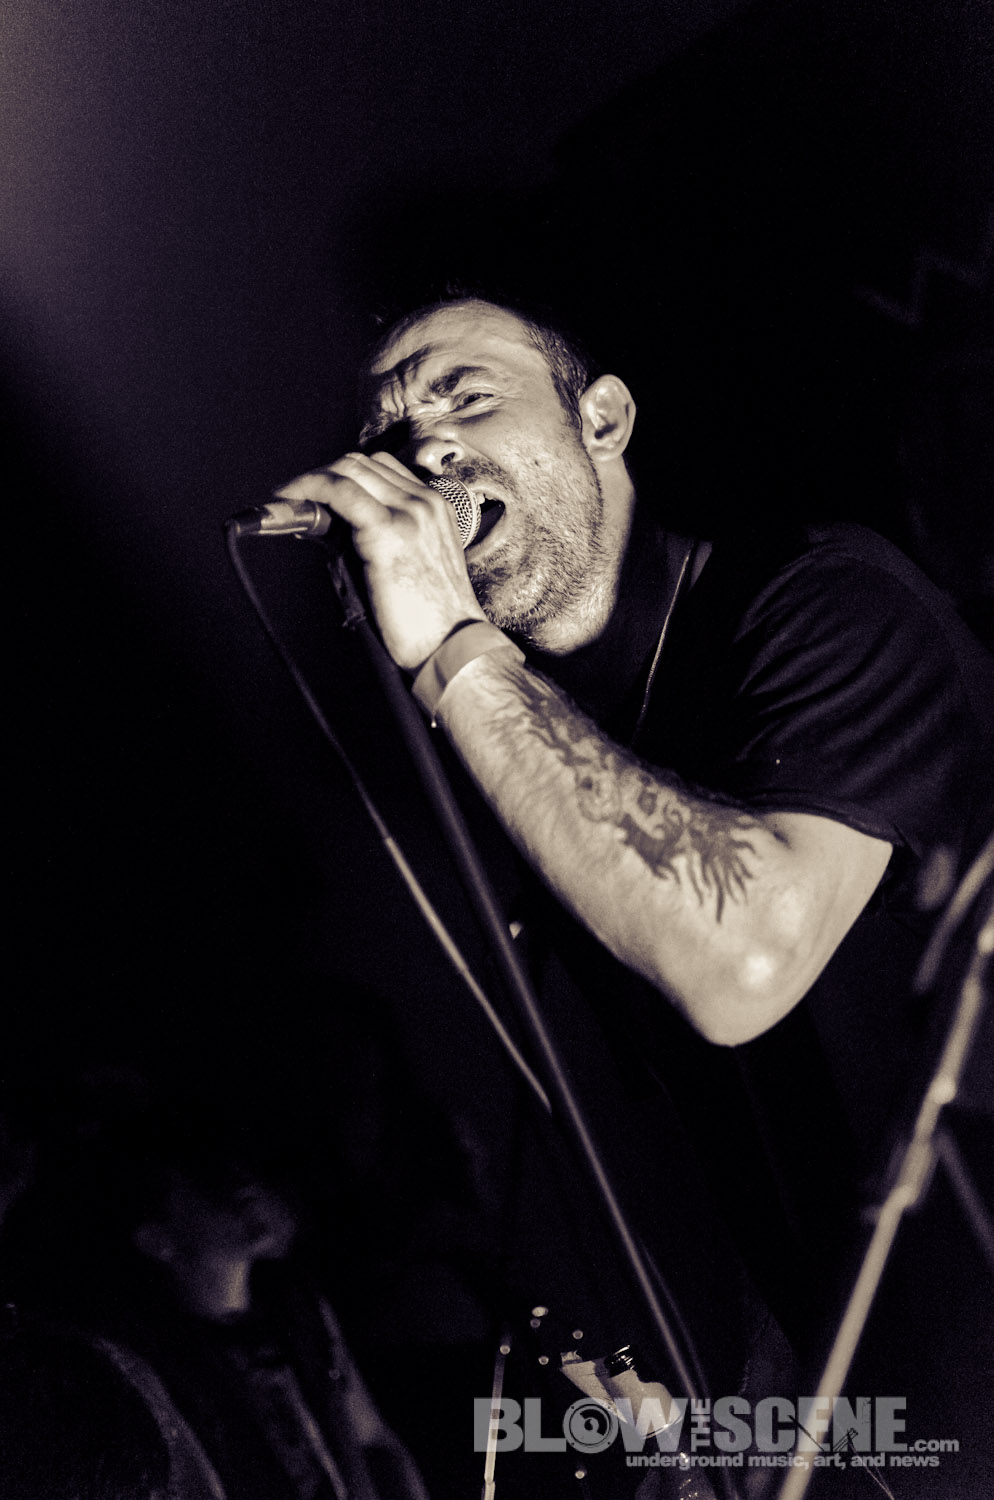 Antisect - band live at The Level Room in Philadelphia